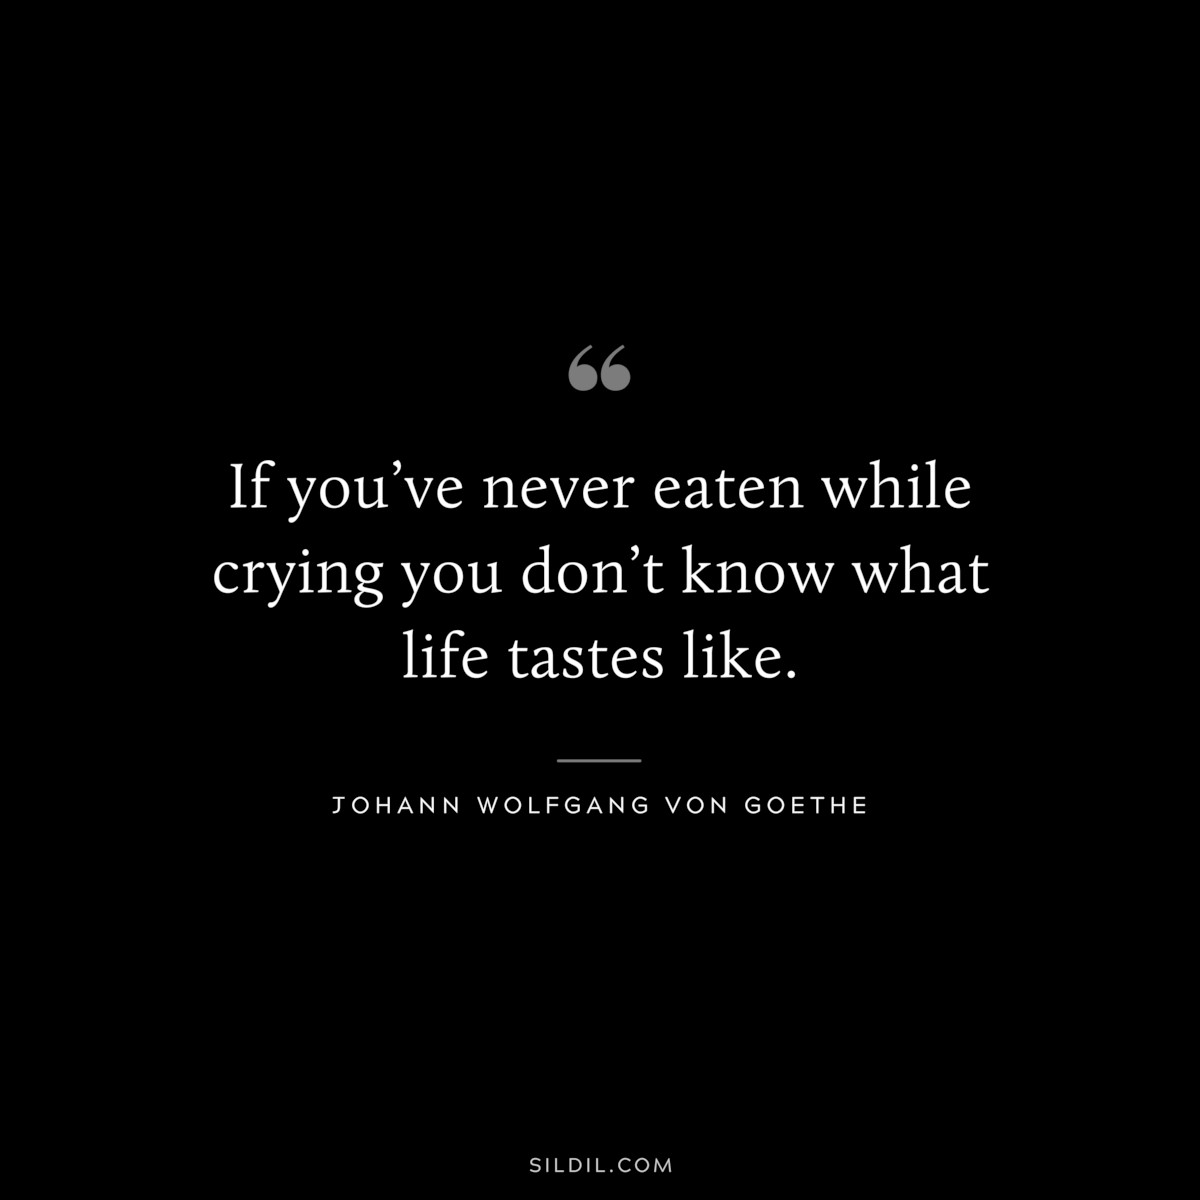 If you’ve never eaten while crying you don’t know what life tastes like.― Johann Wolfgang von Goethe